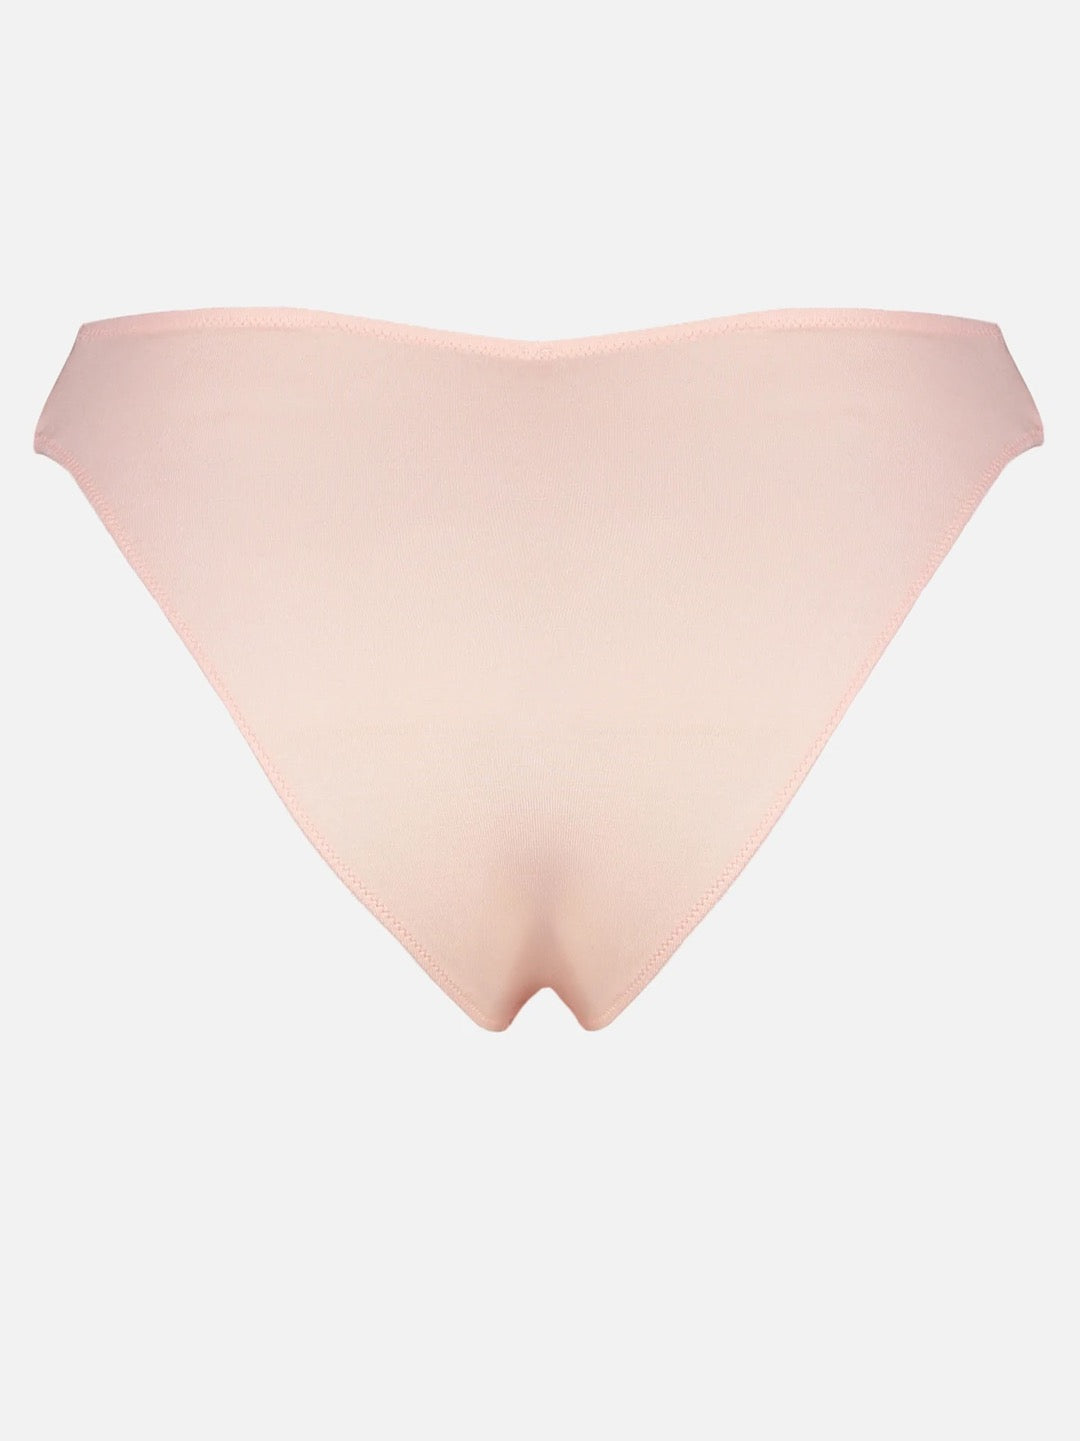 A Videris Whitney Bikini – Rosy in a light pink color.